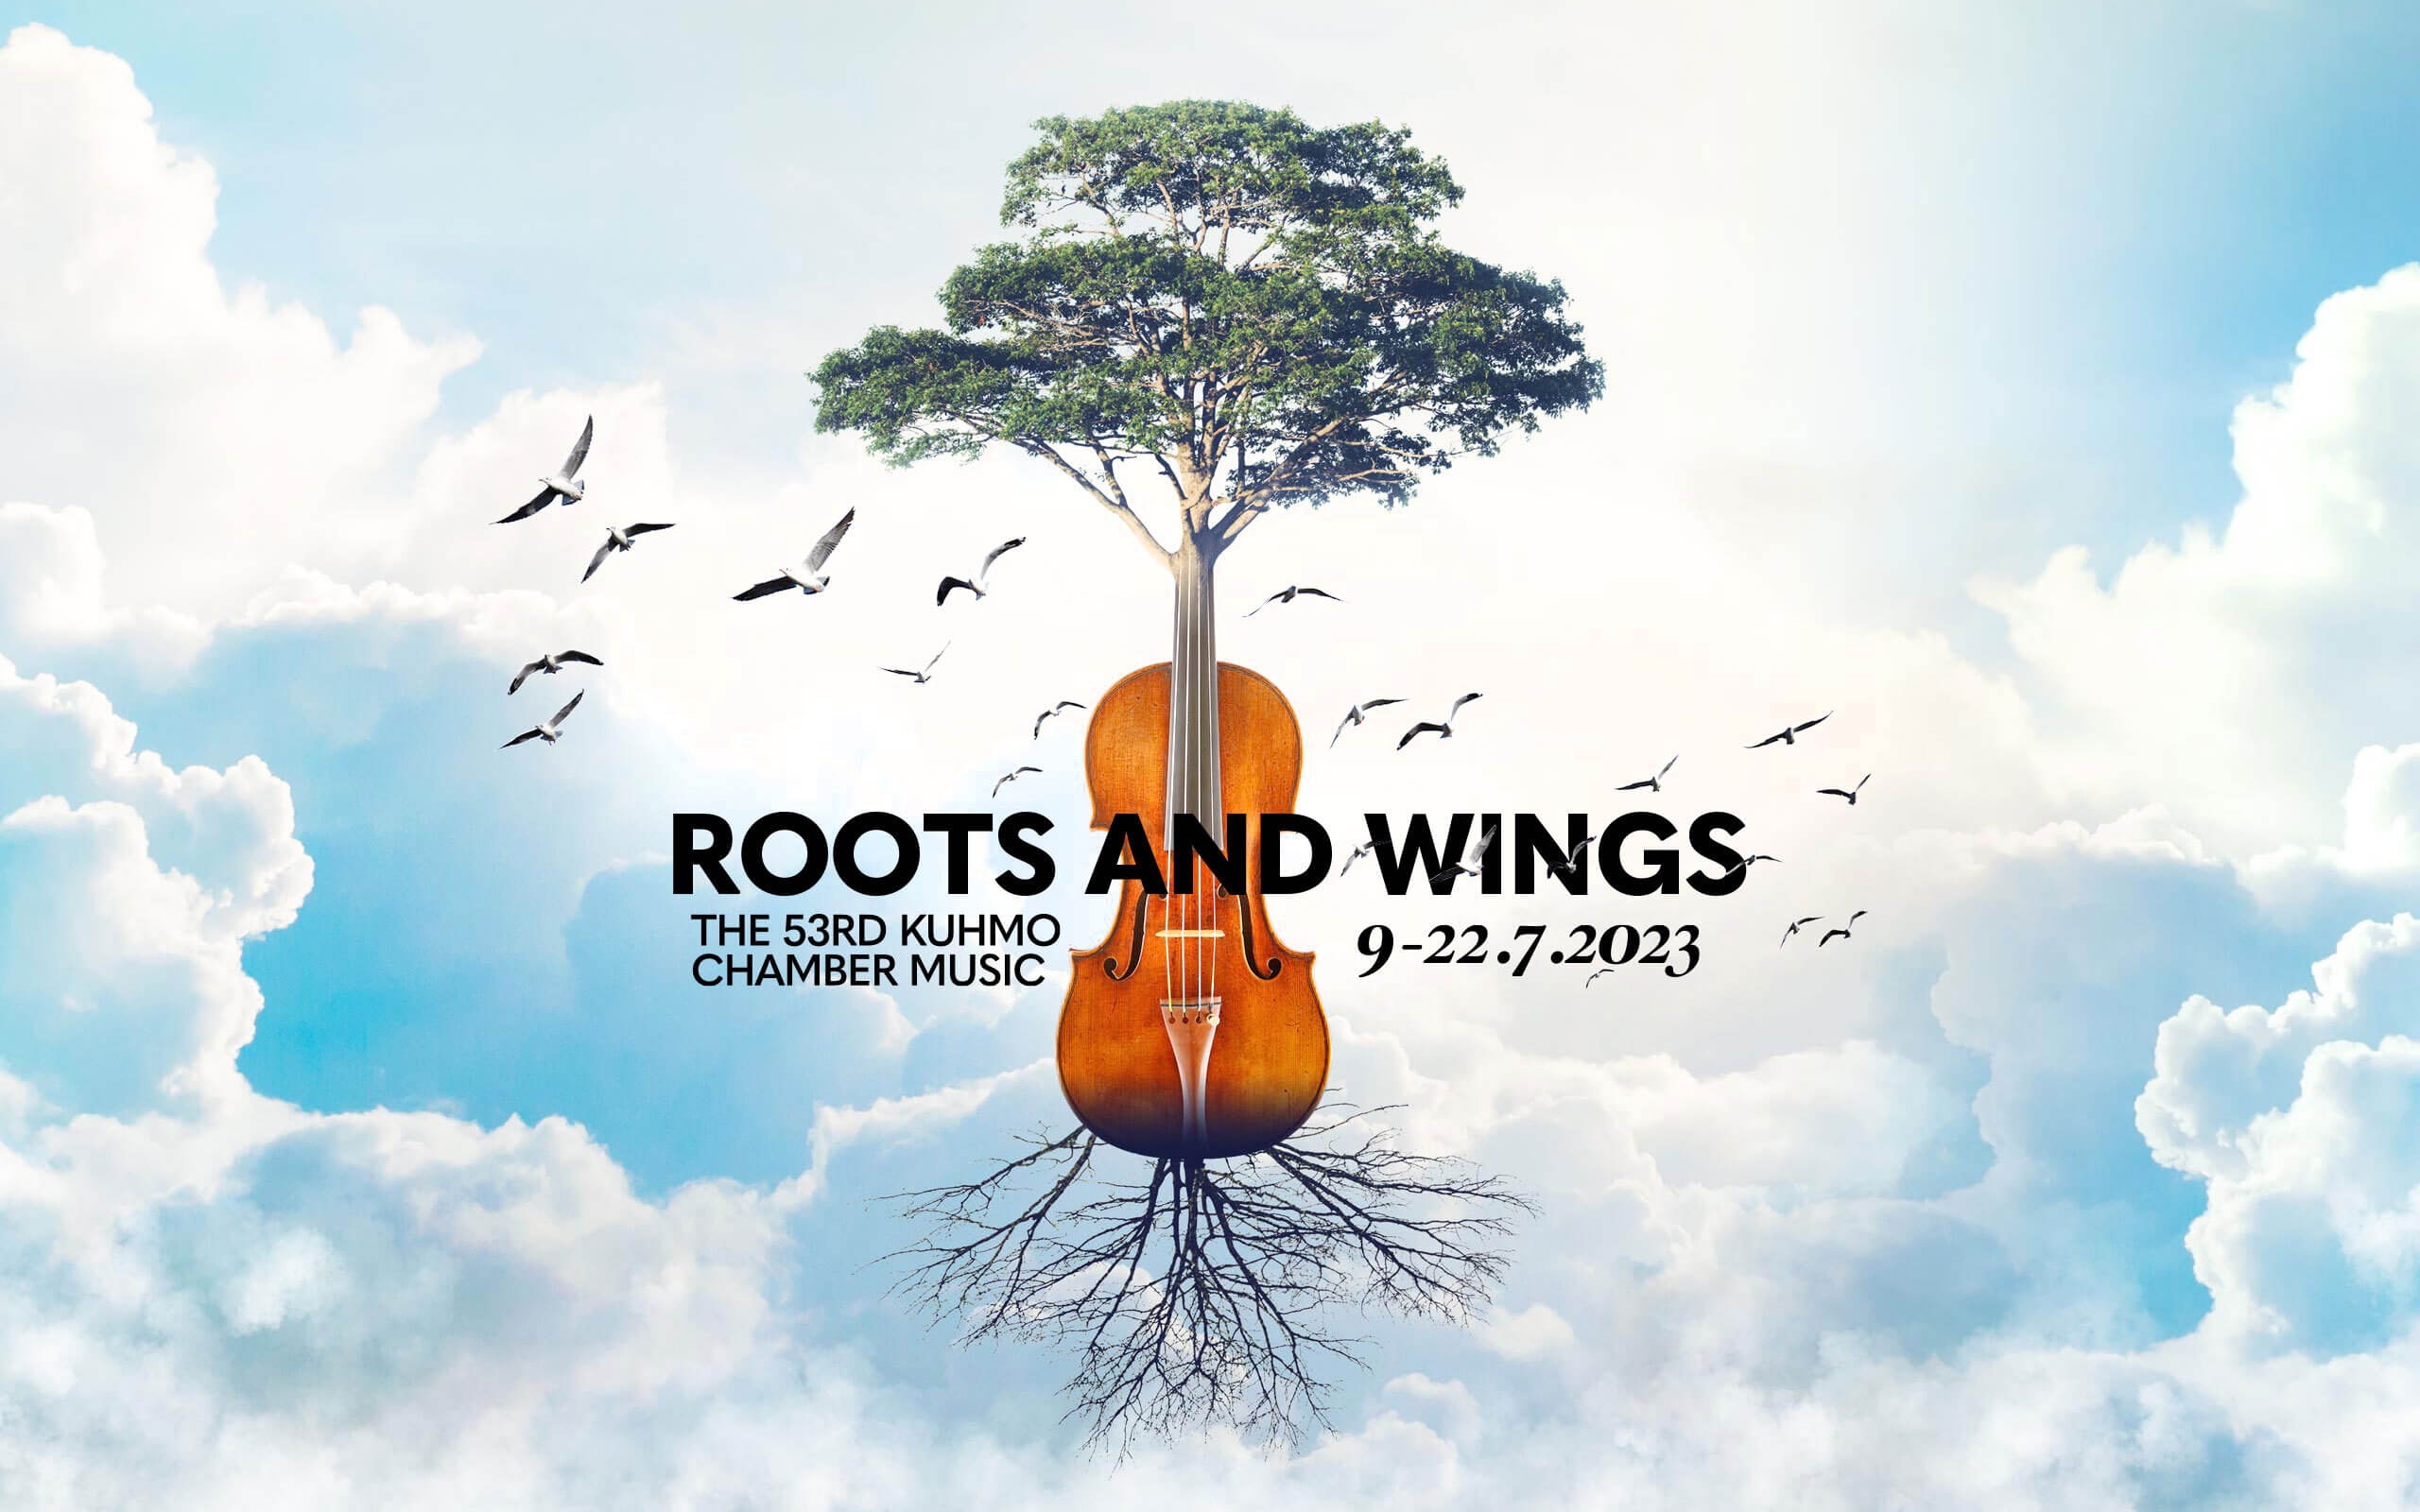 Kuhmo Chamber Music - Roots and Wings